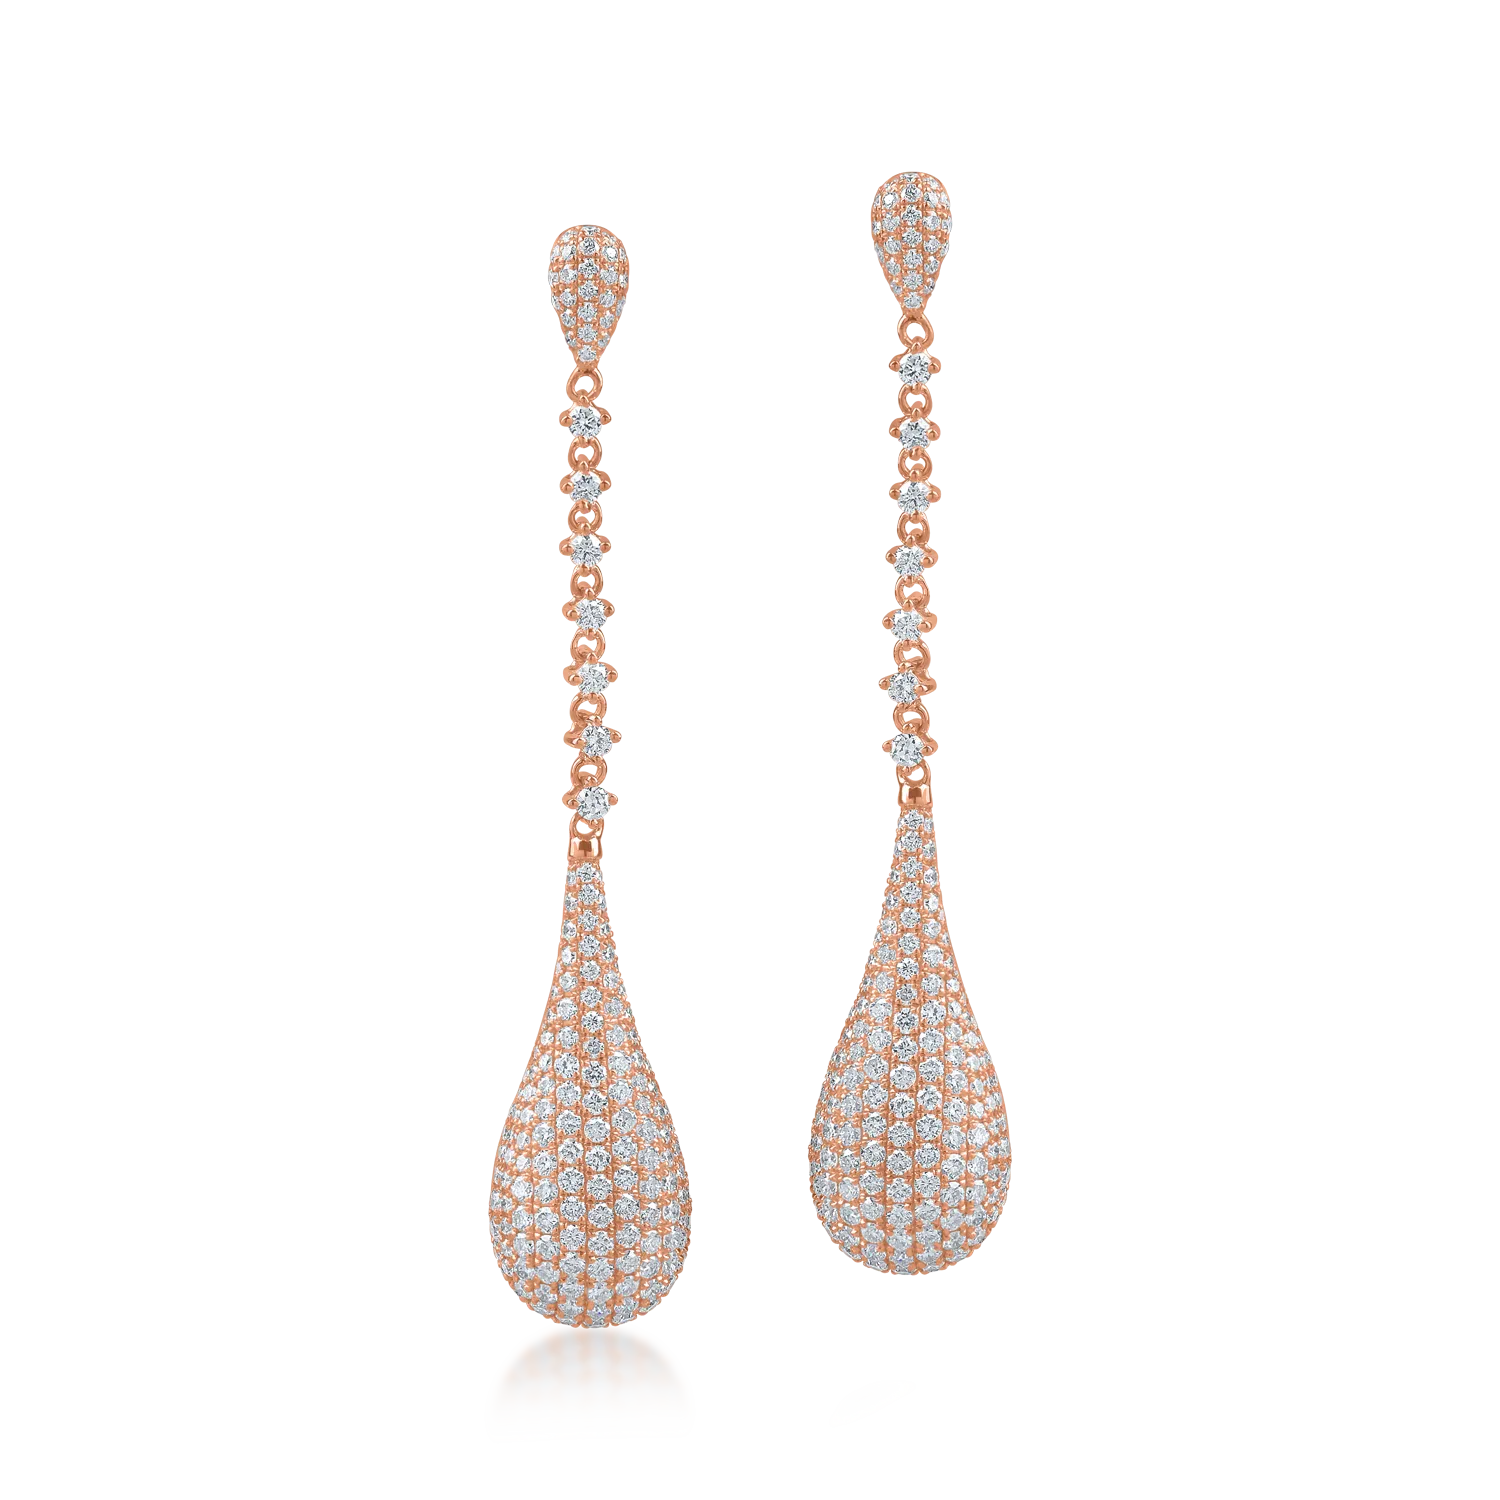 Rose gold earrings with 1.7ct diamonds